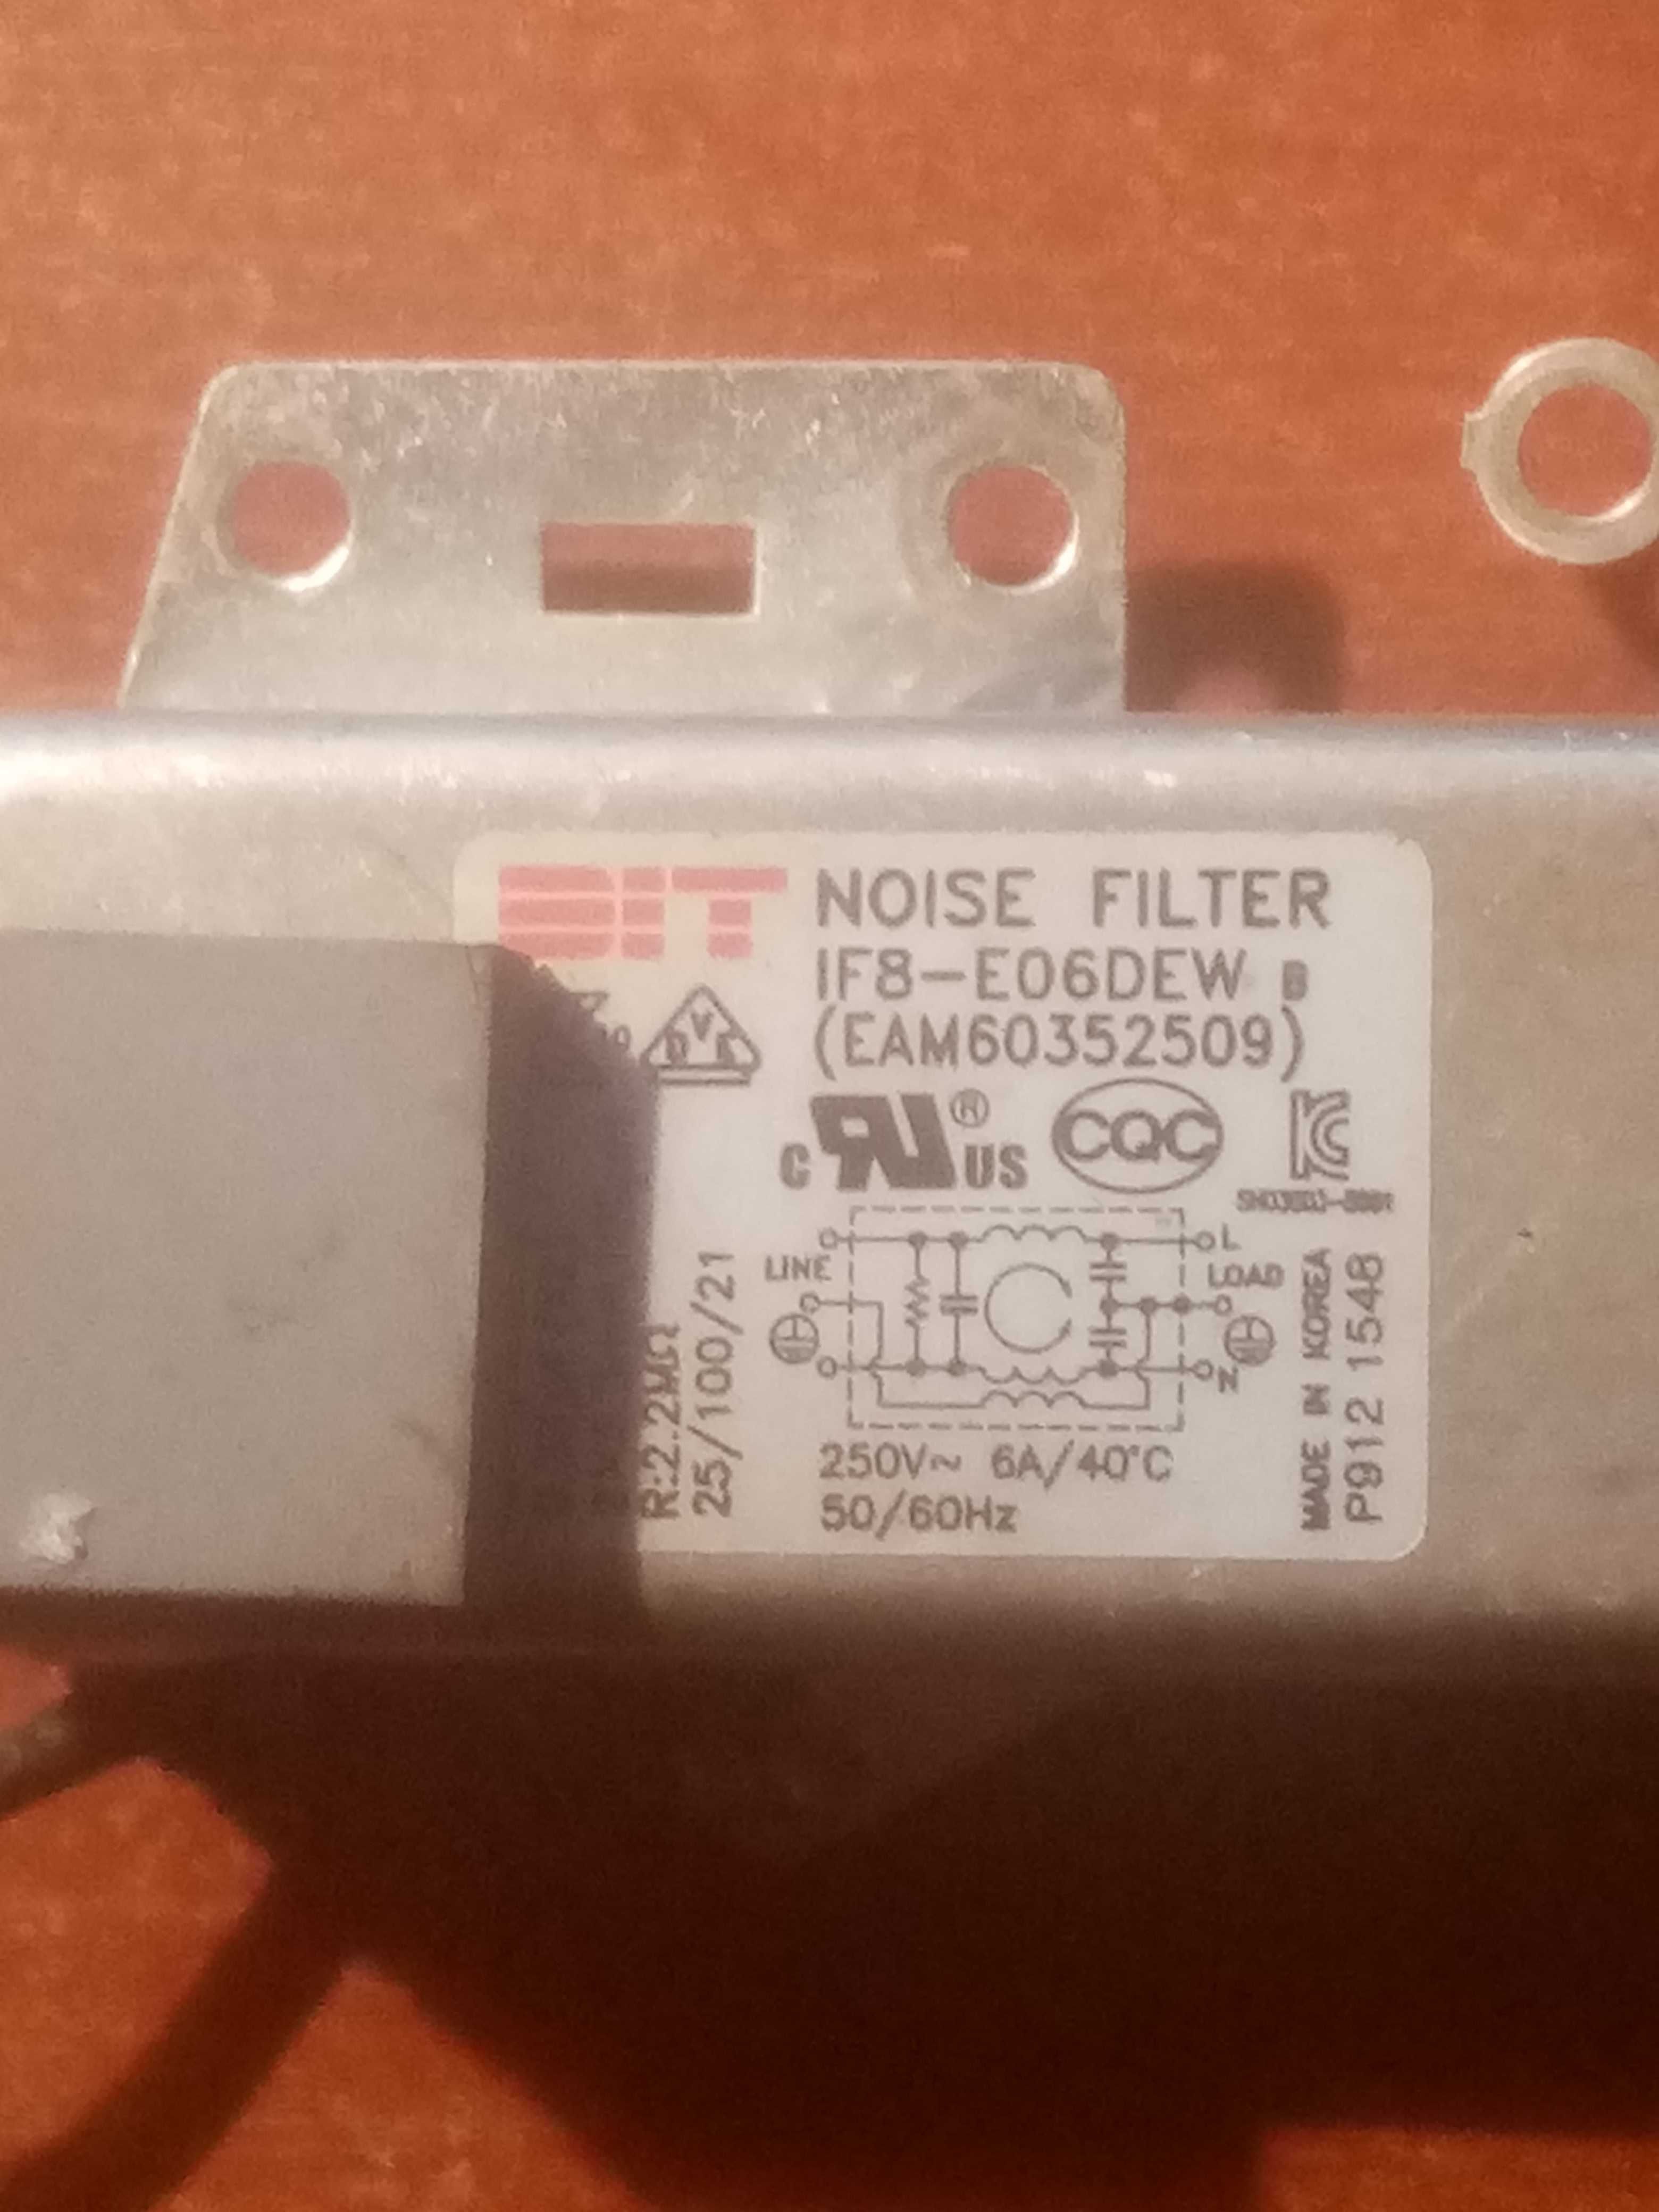 Noice Filter if8-eo6dew(EAM60352509 )